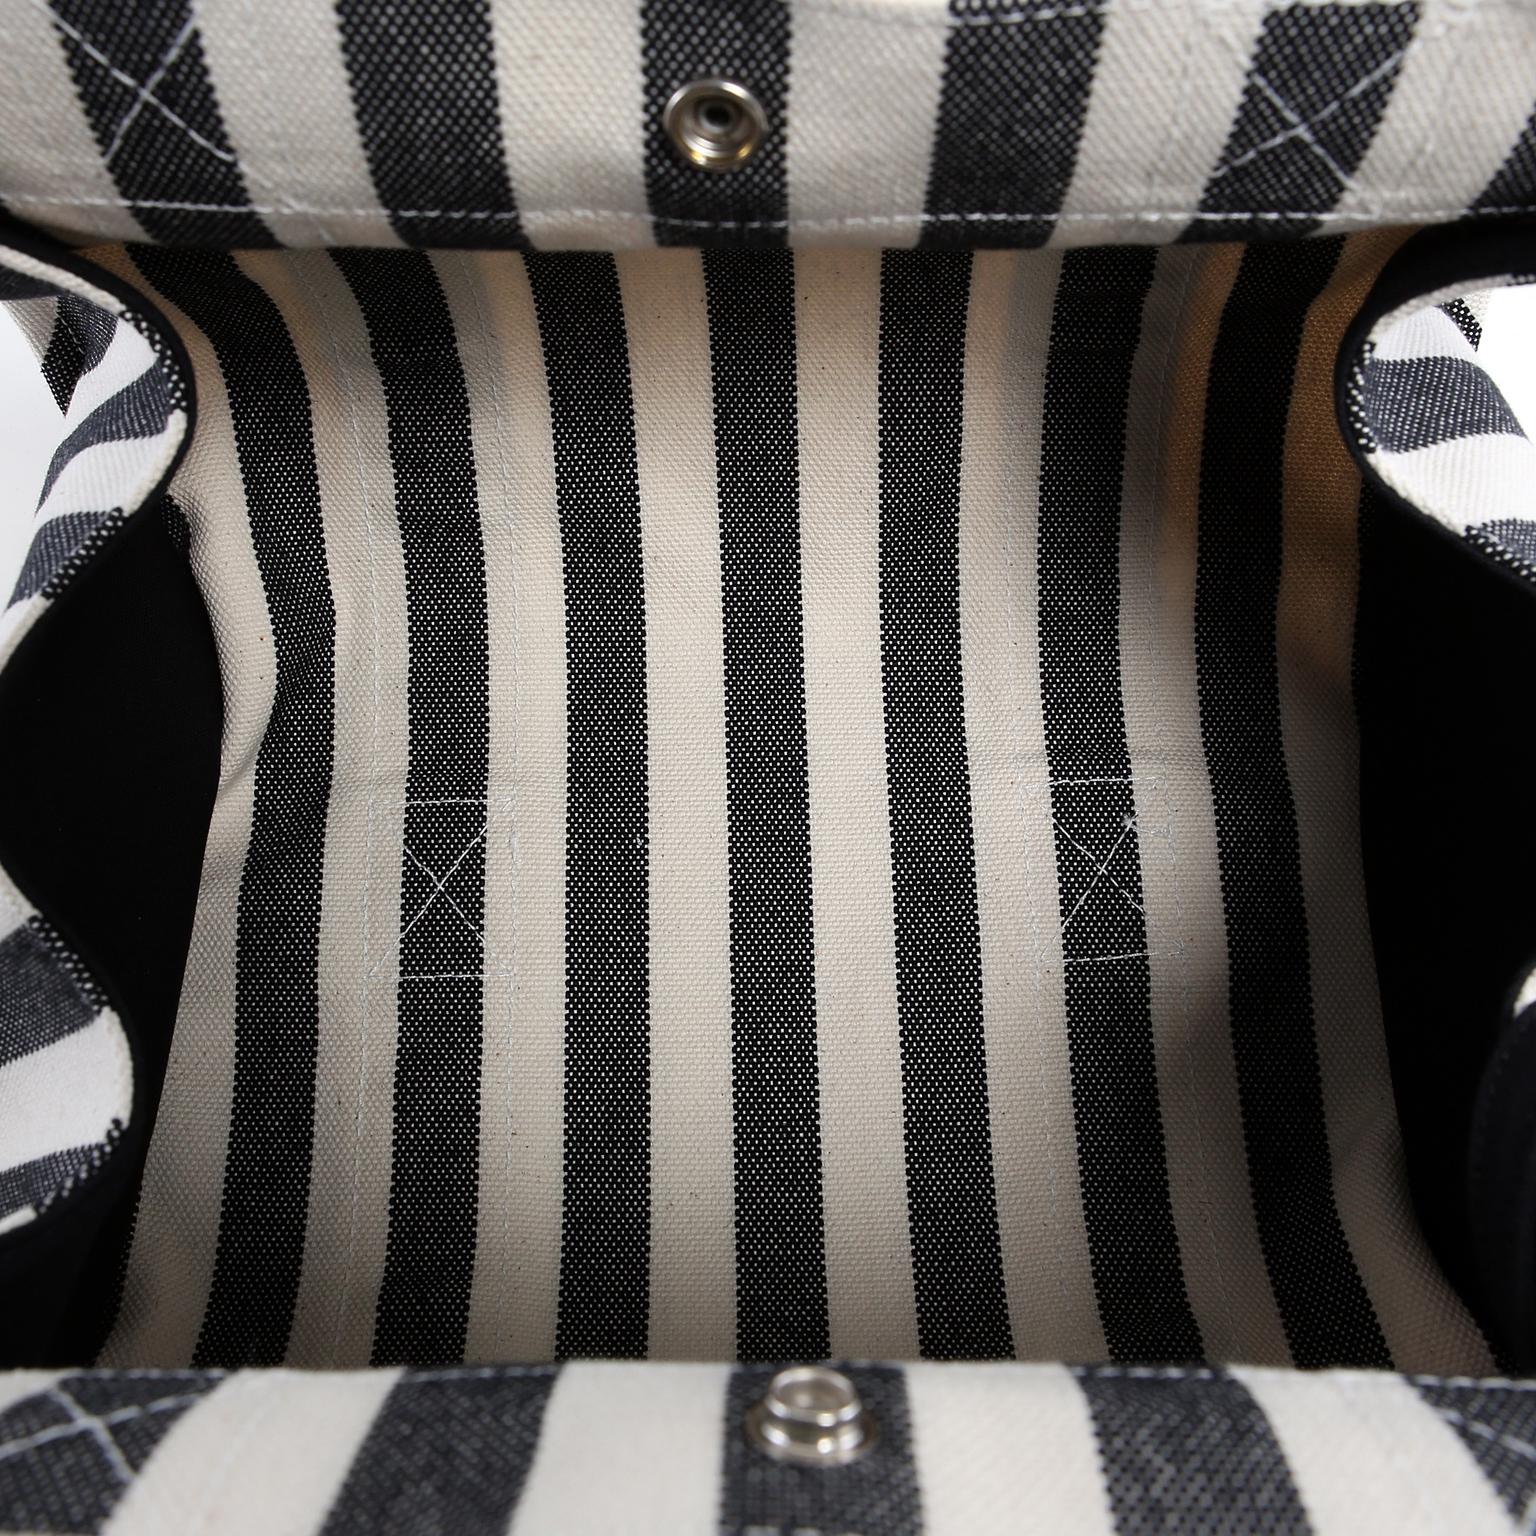 Hermes Black and White Striped Canvas Tote with pochette For Sale 6